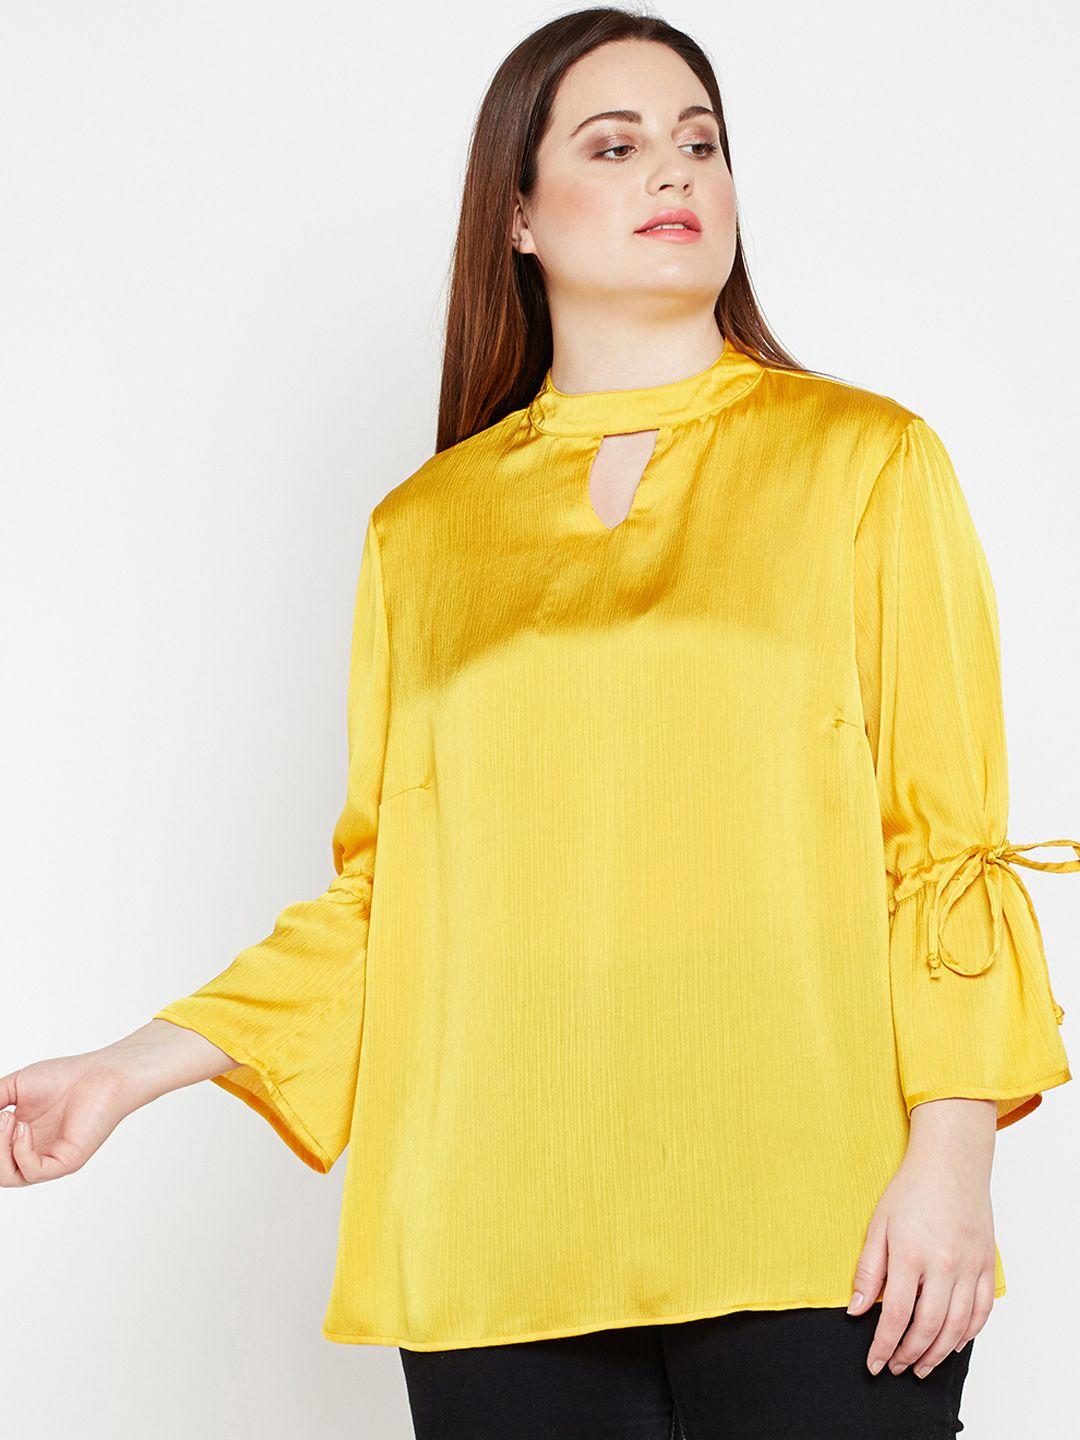 oxolloxo-women-yellow-solid-a-line-top